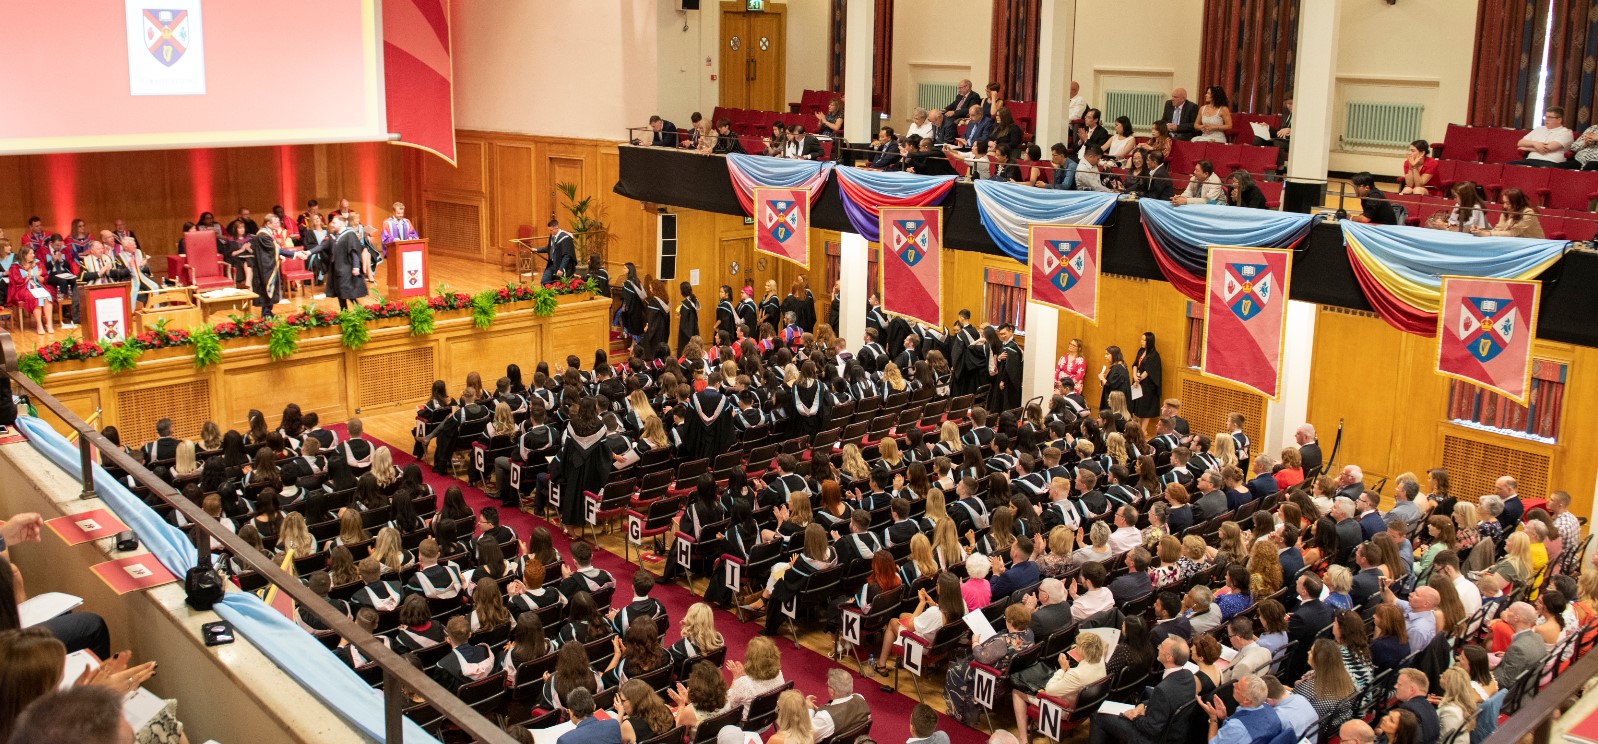 Graduation ceremony in a packed Sir William Whitla Hall at Queen's